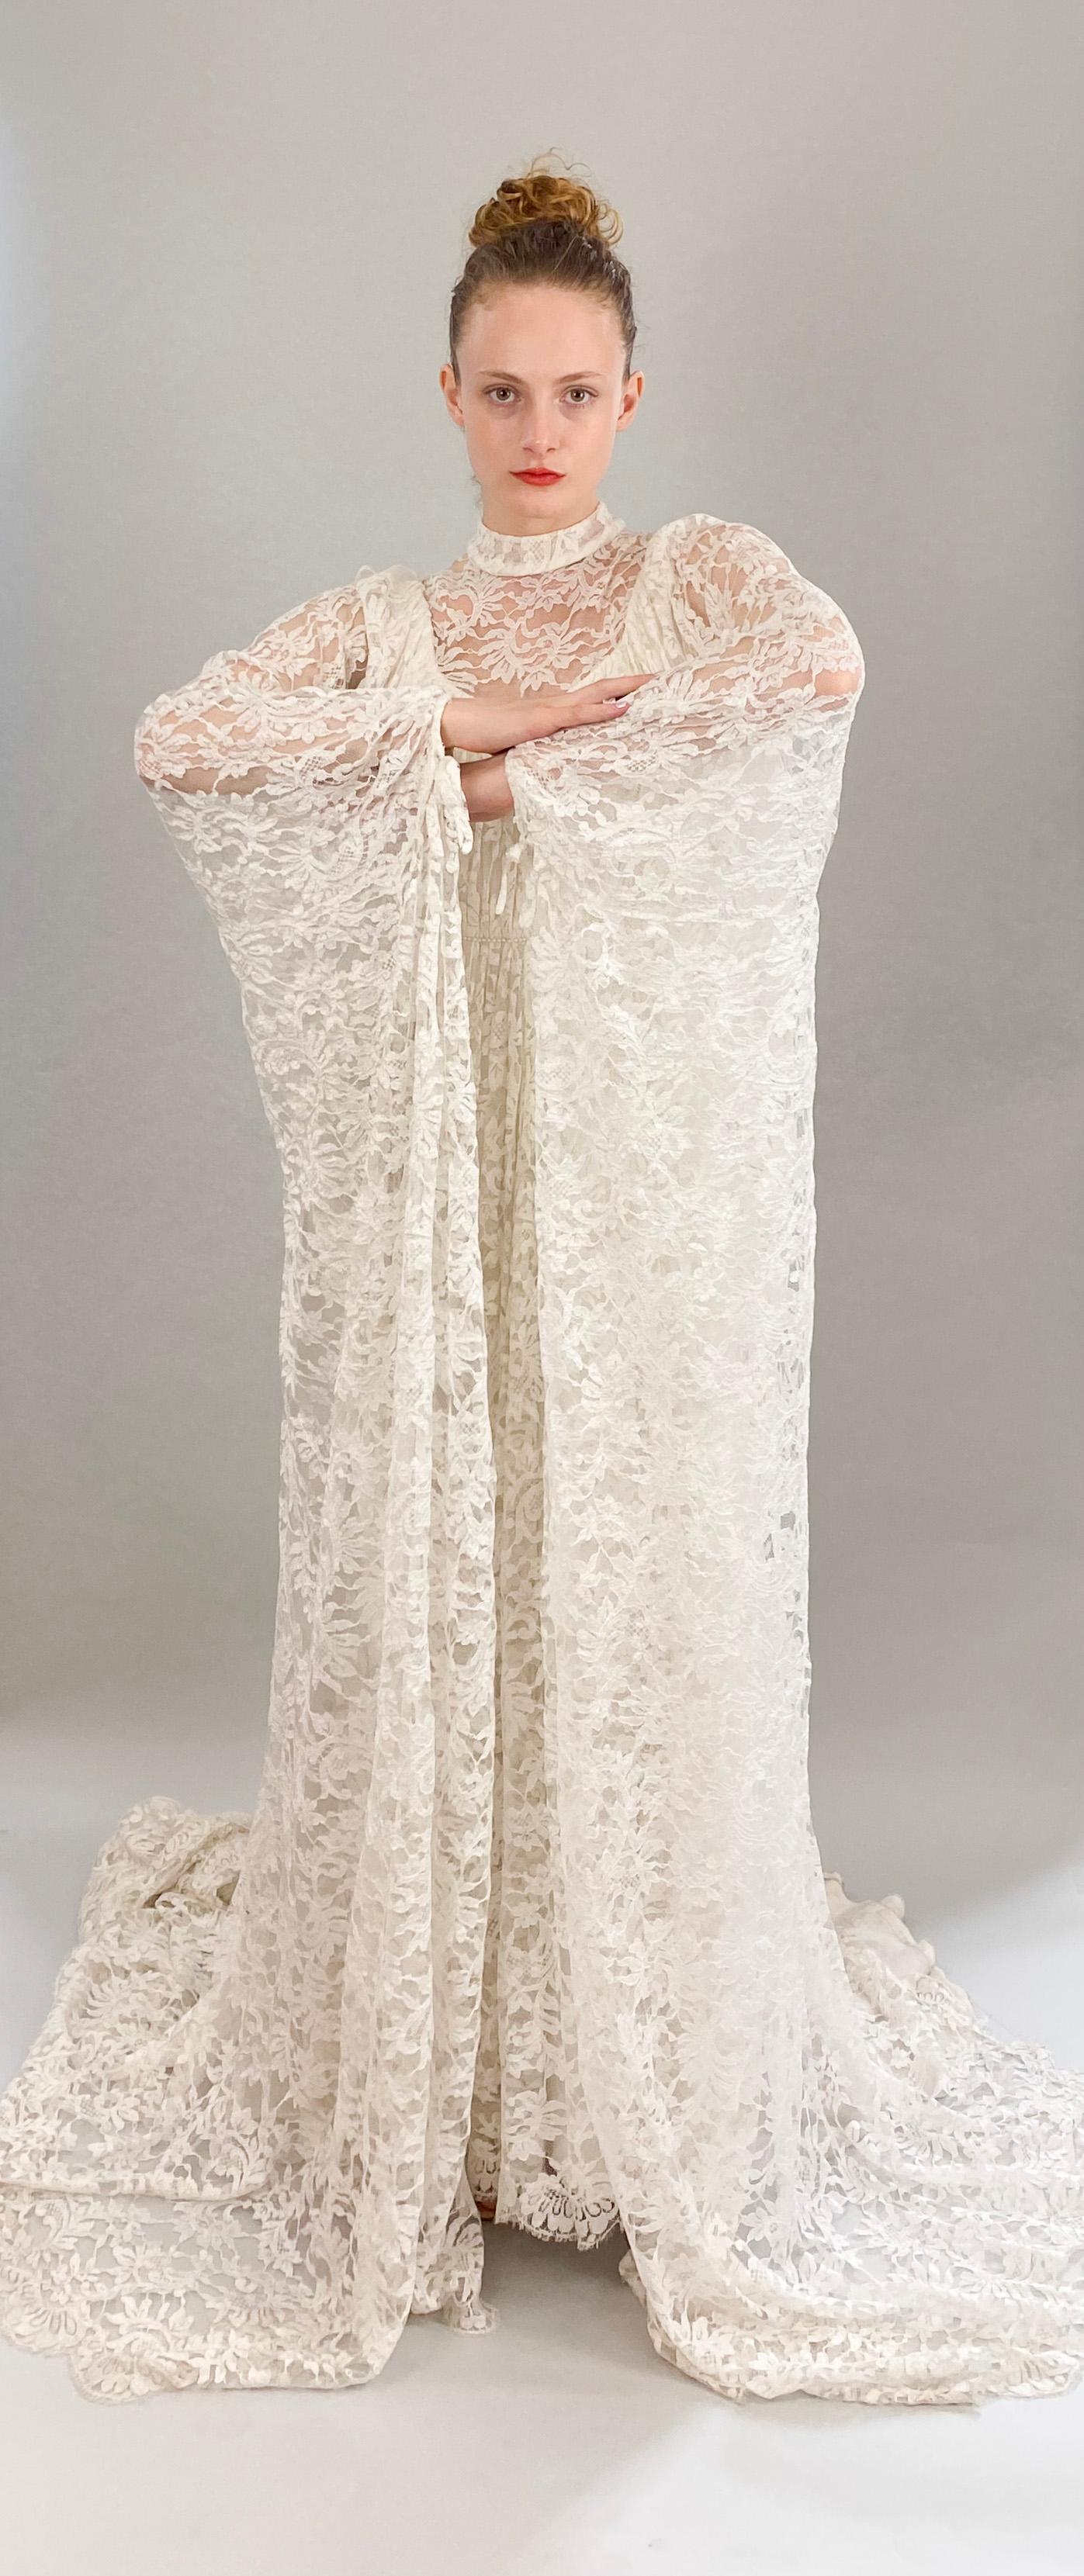 Vintage White Lace Bridal Gown with Batwing Sleeves & Train In Good Condition For Sale In Los Angeles, CA